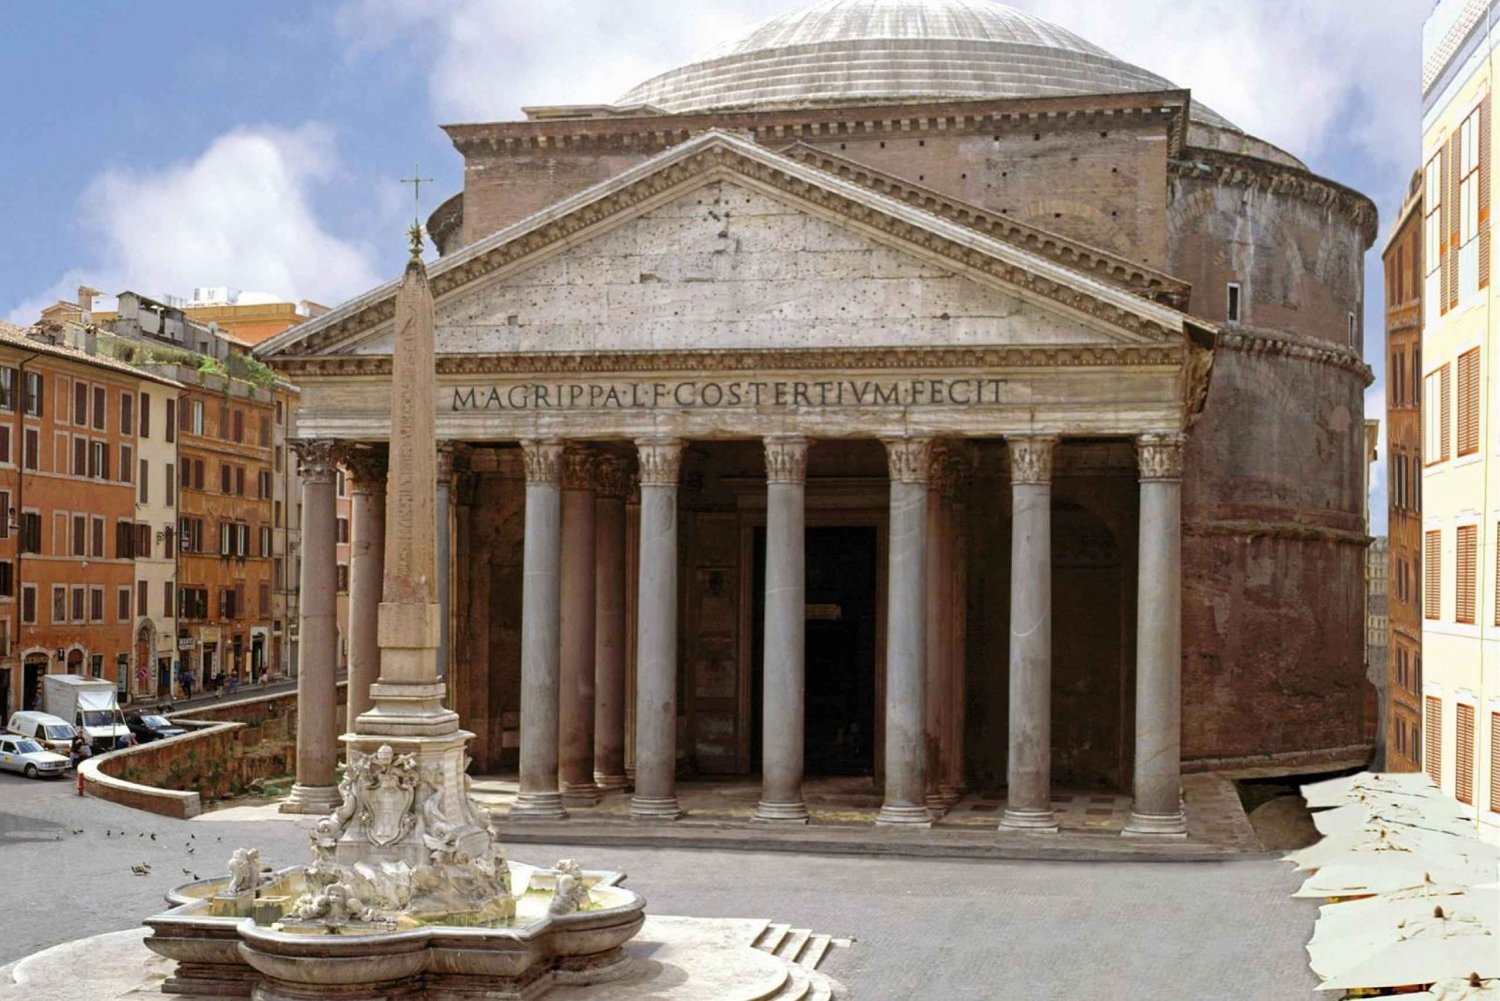 Rome: Pantheon Skip-the-Line Entry Ticket